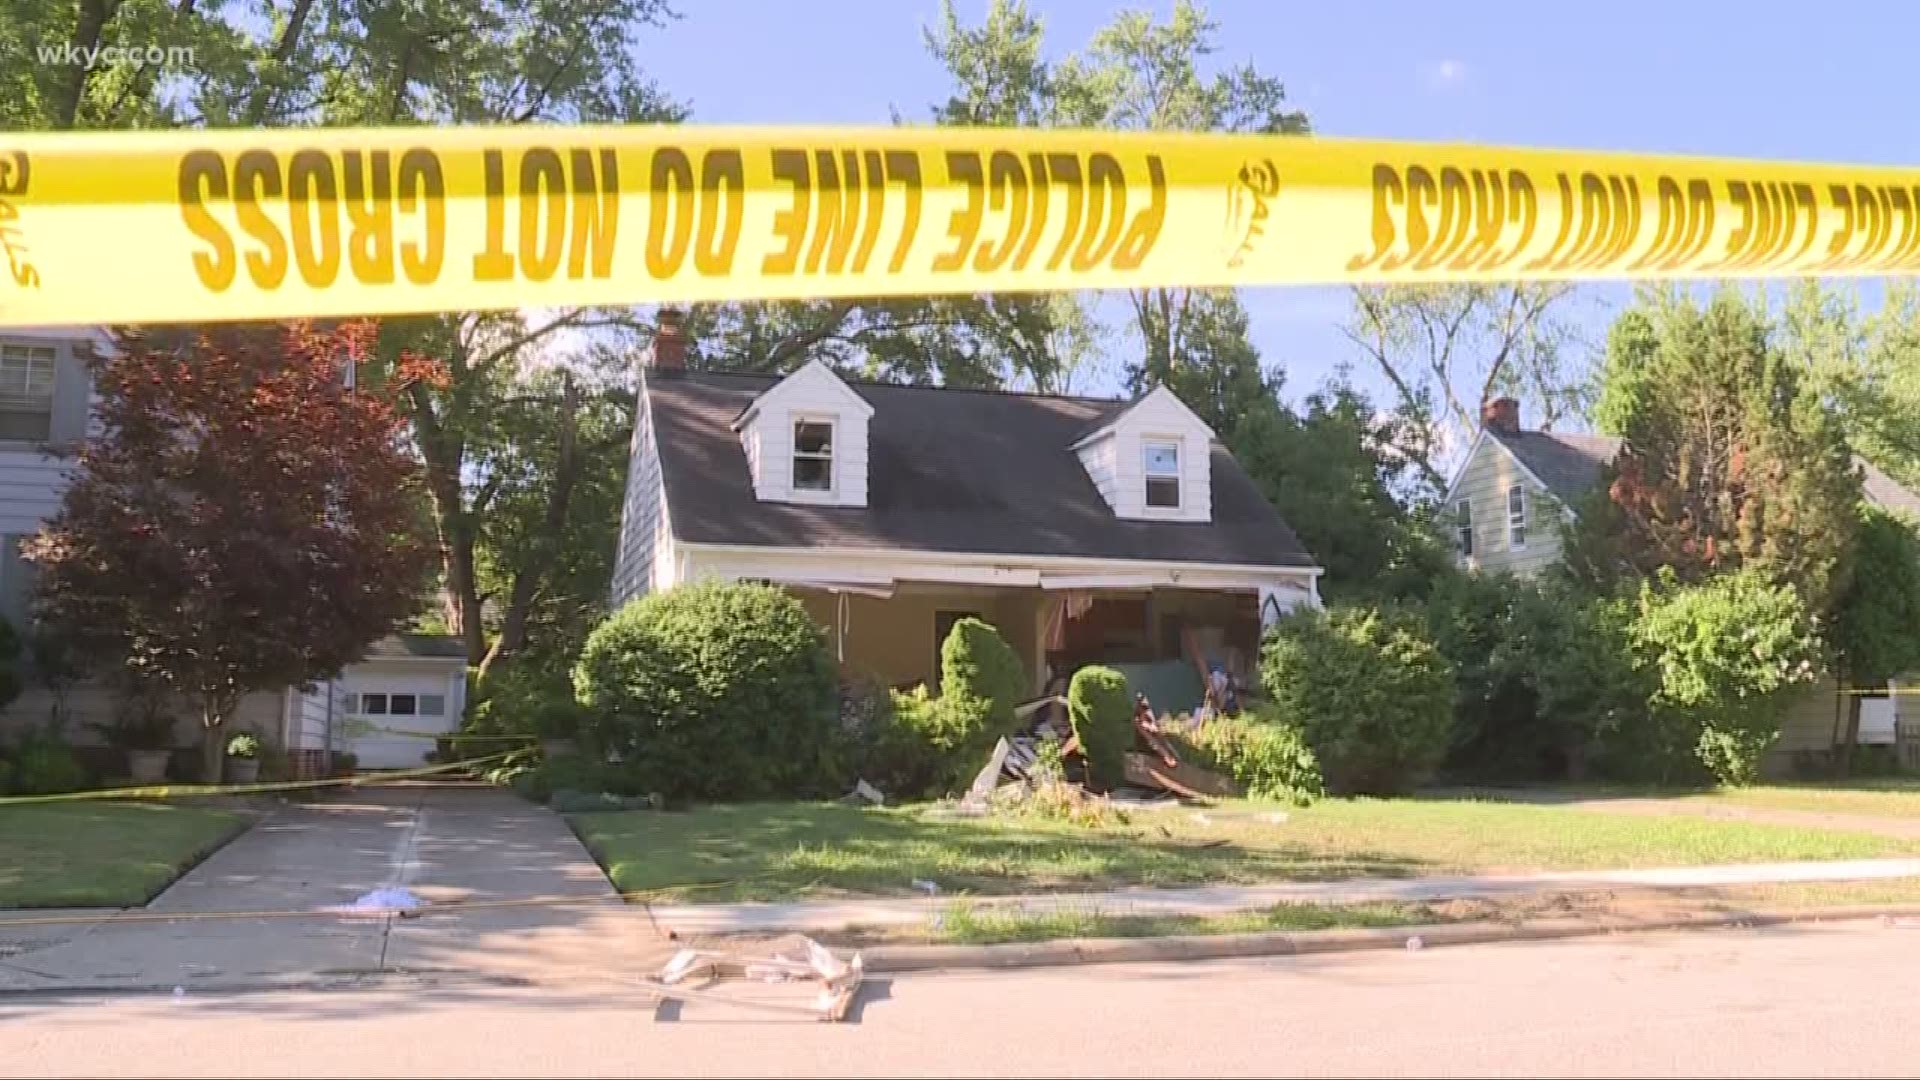 Officials say two sons killed father prior to committing suicide 